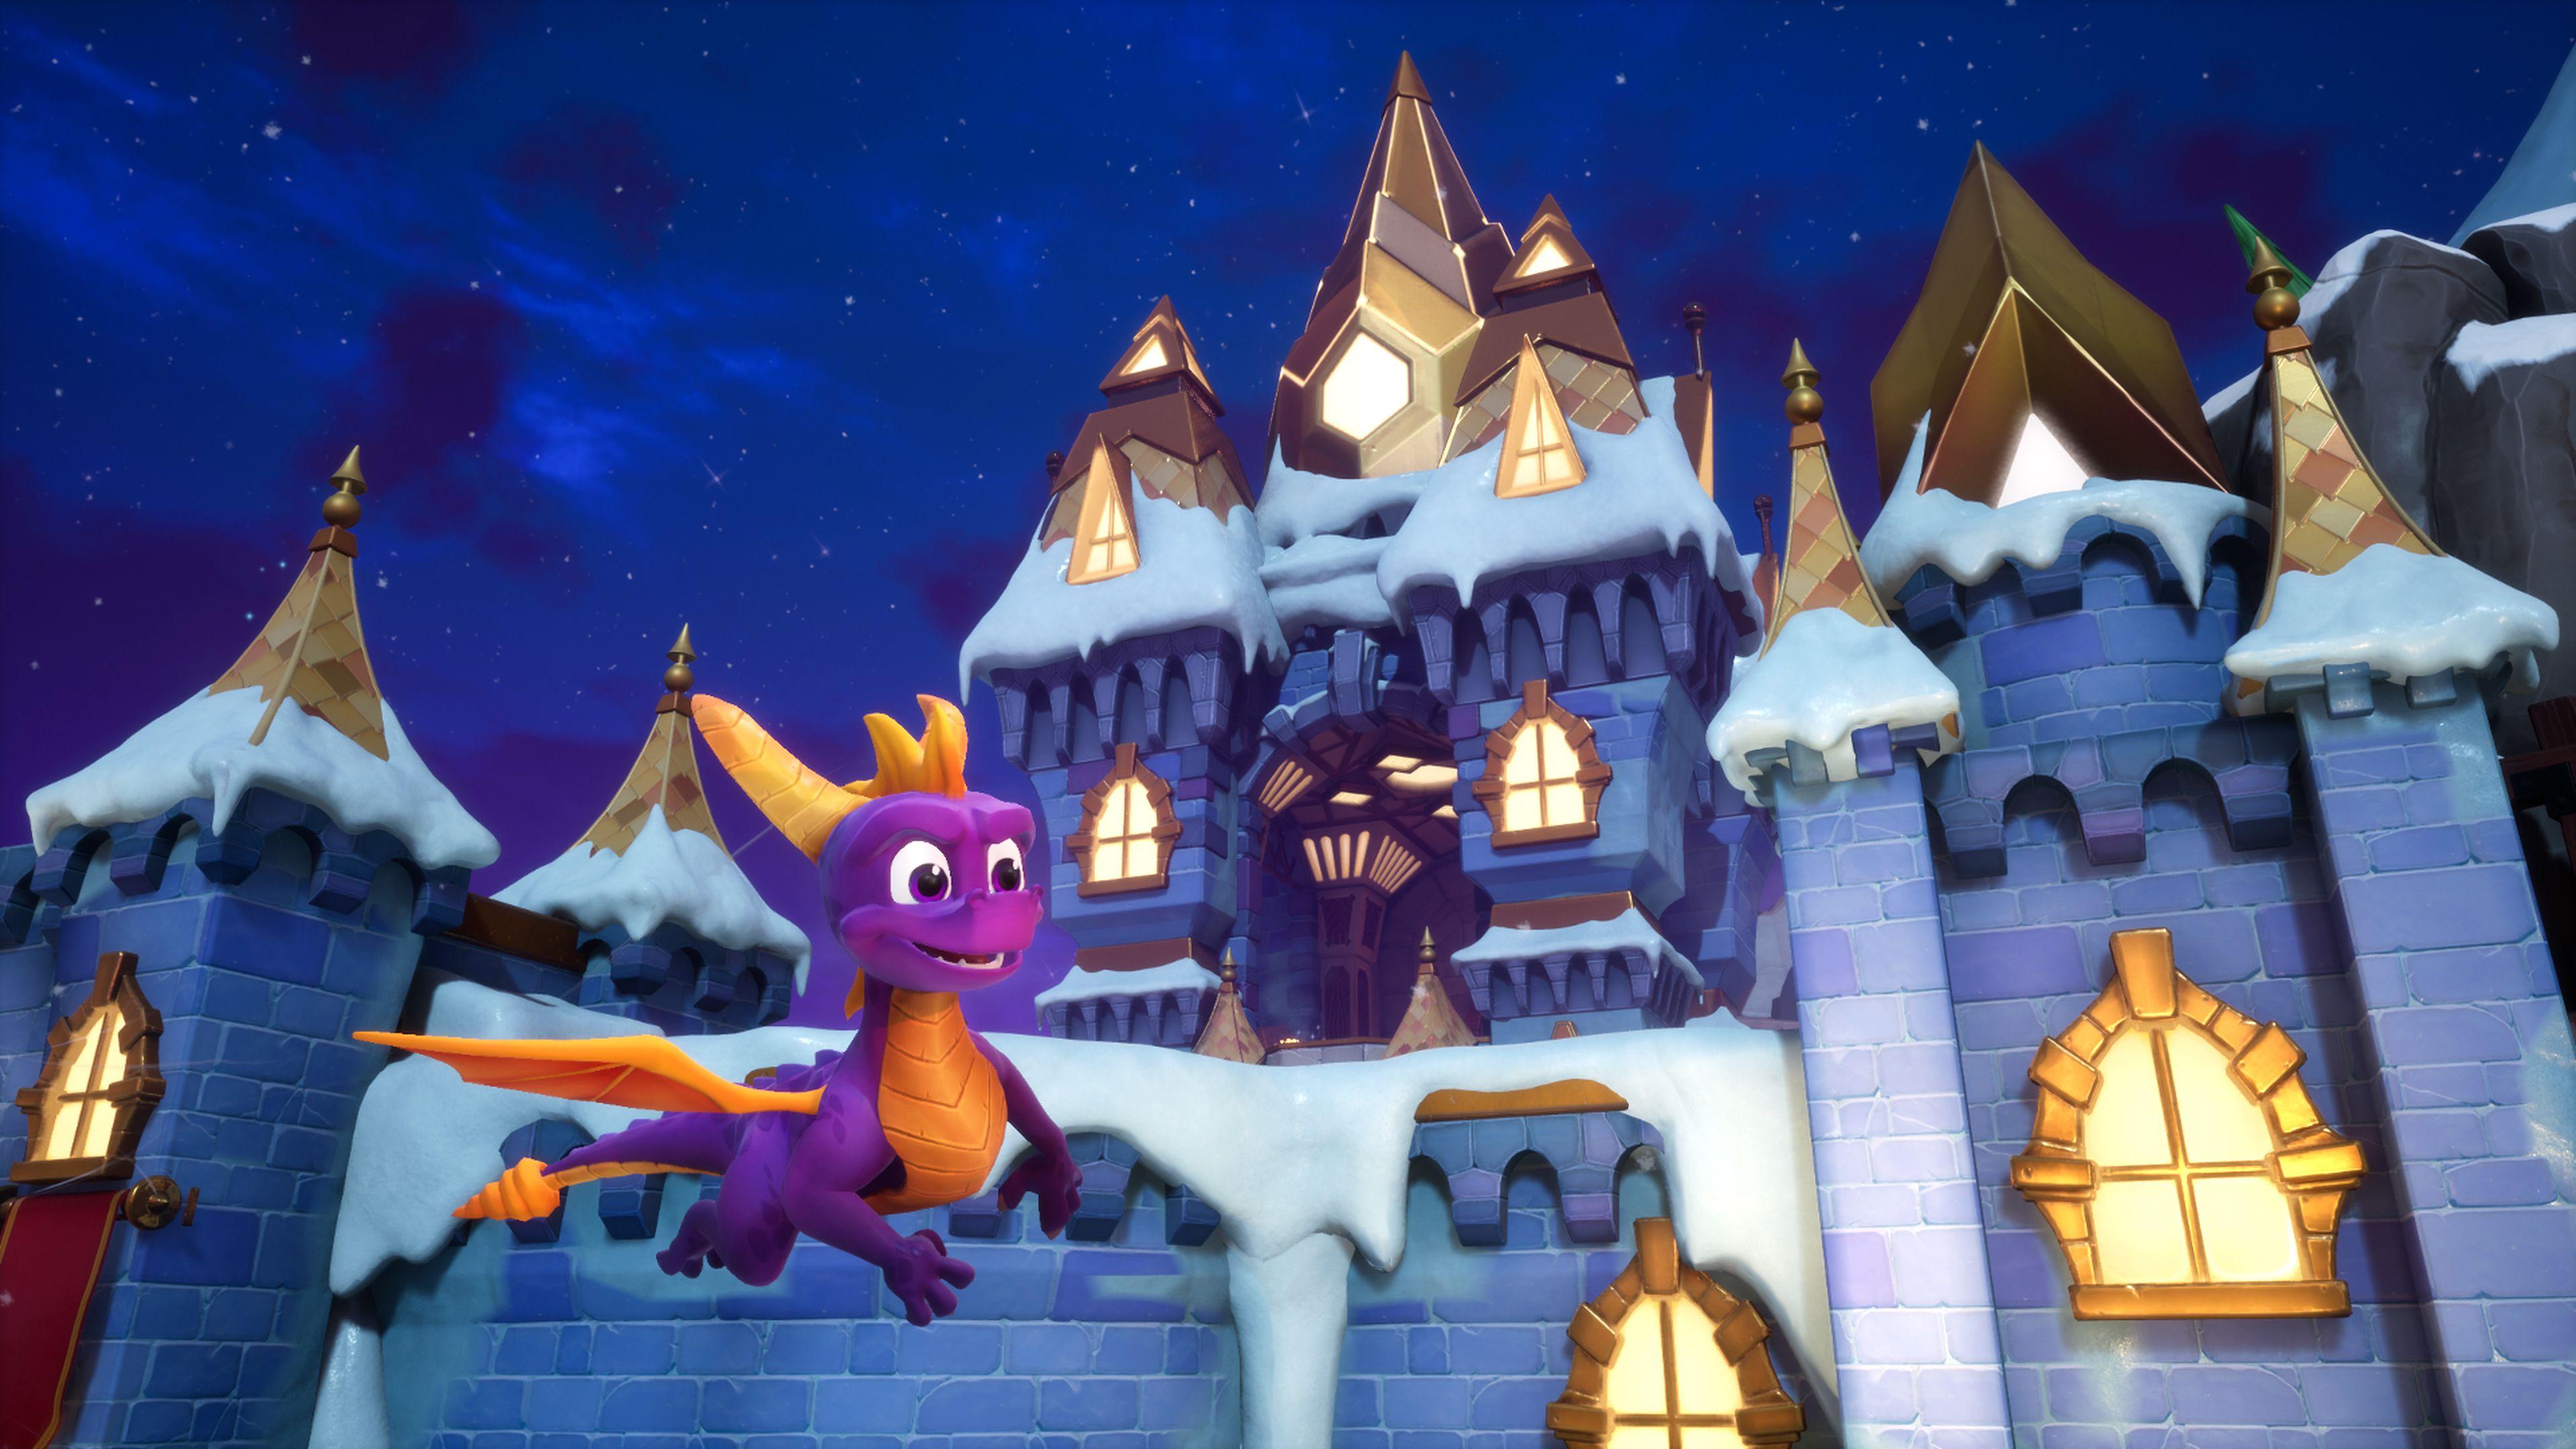 Picture Of Spyro Reignited Trilogy New Image Show Big Changes 10 11